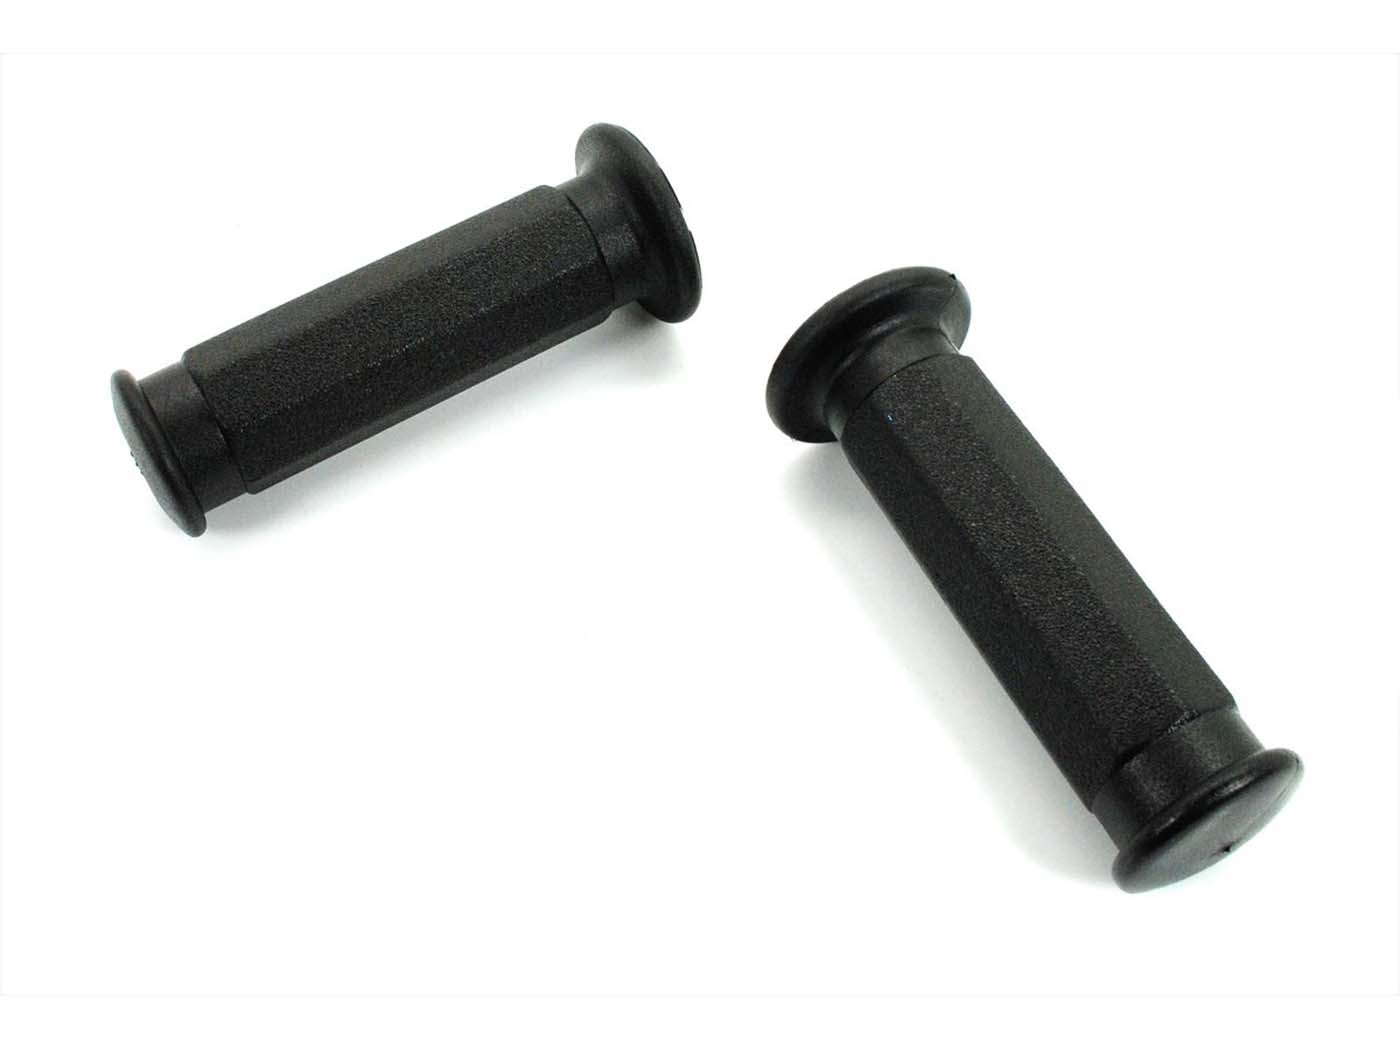 Grips Domino Throttle/fixed Grip For Piaggio Ciao Bravo Moped